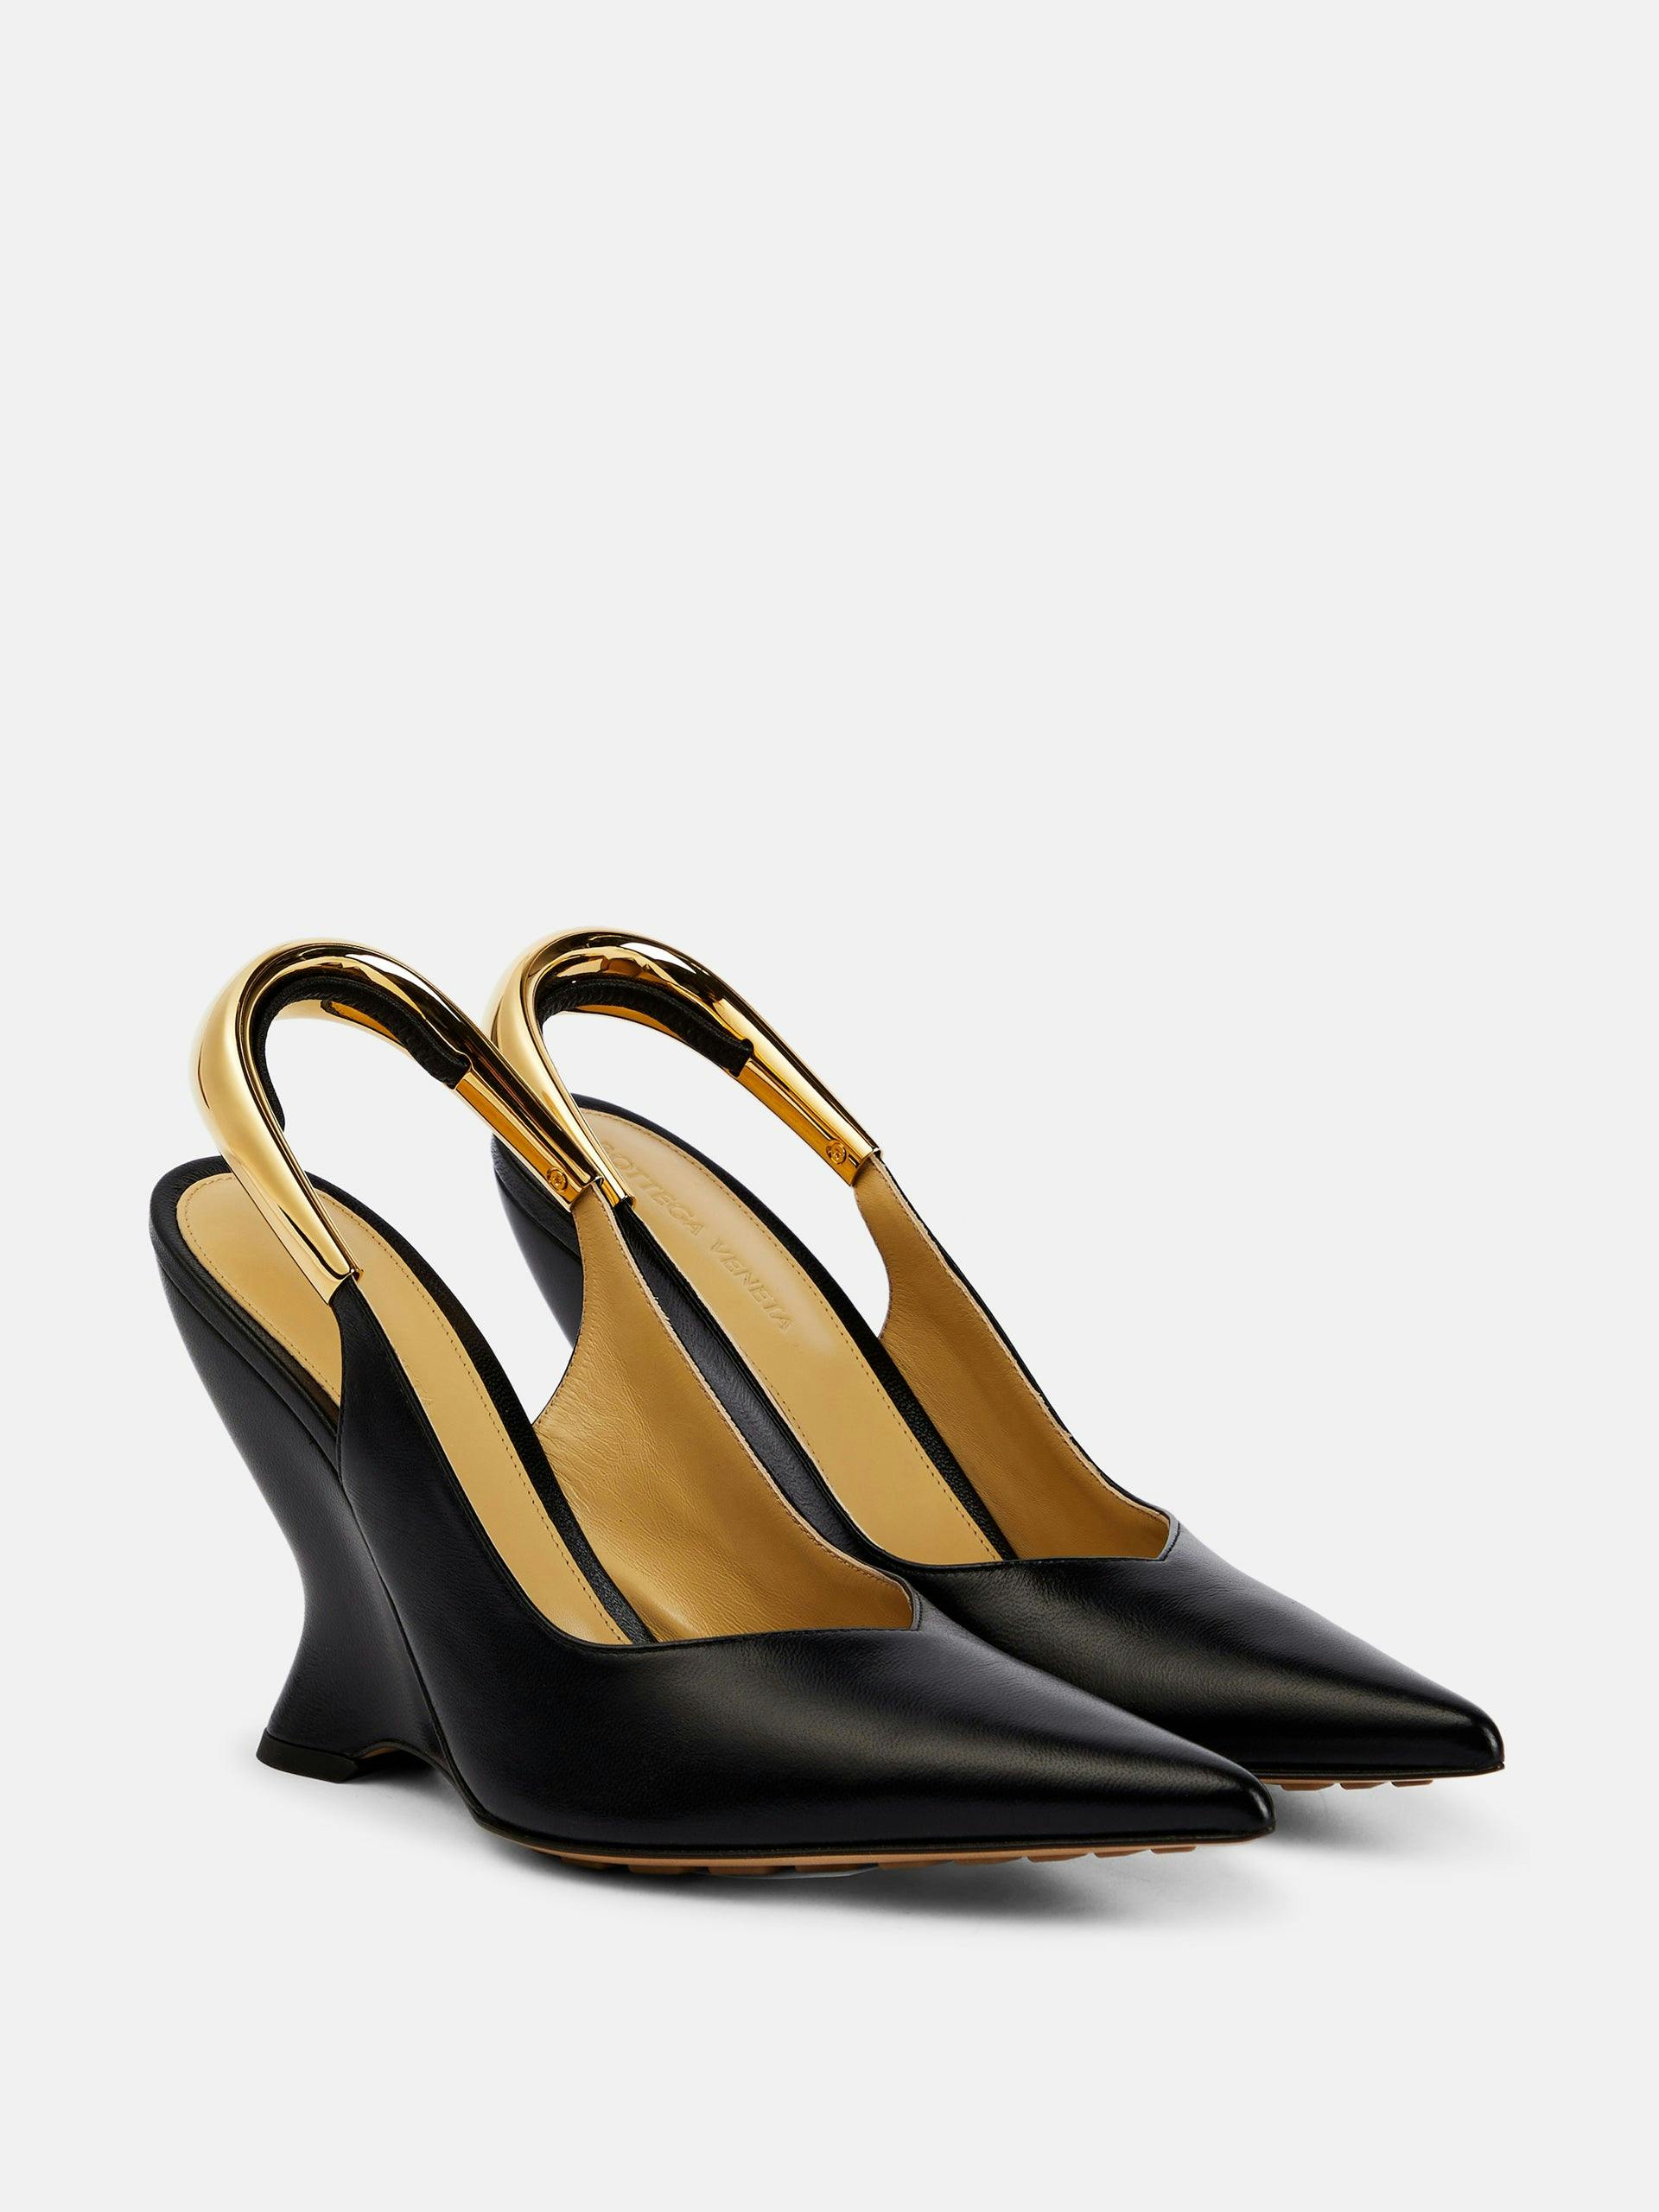 Black leather slingback pumps with gold metal detail